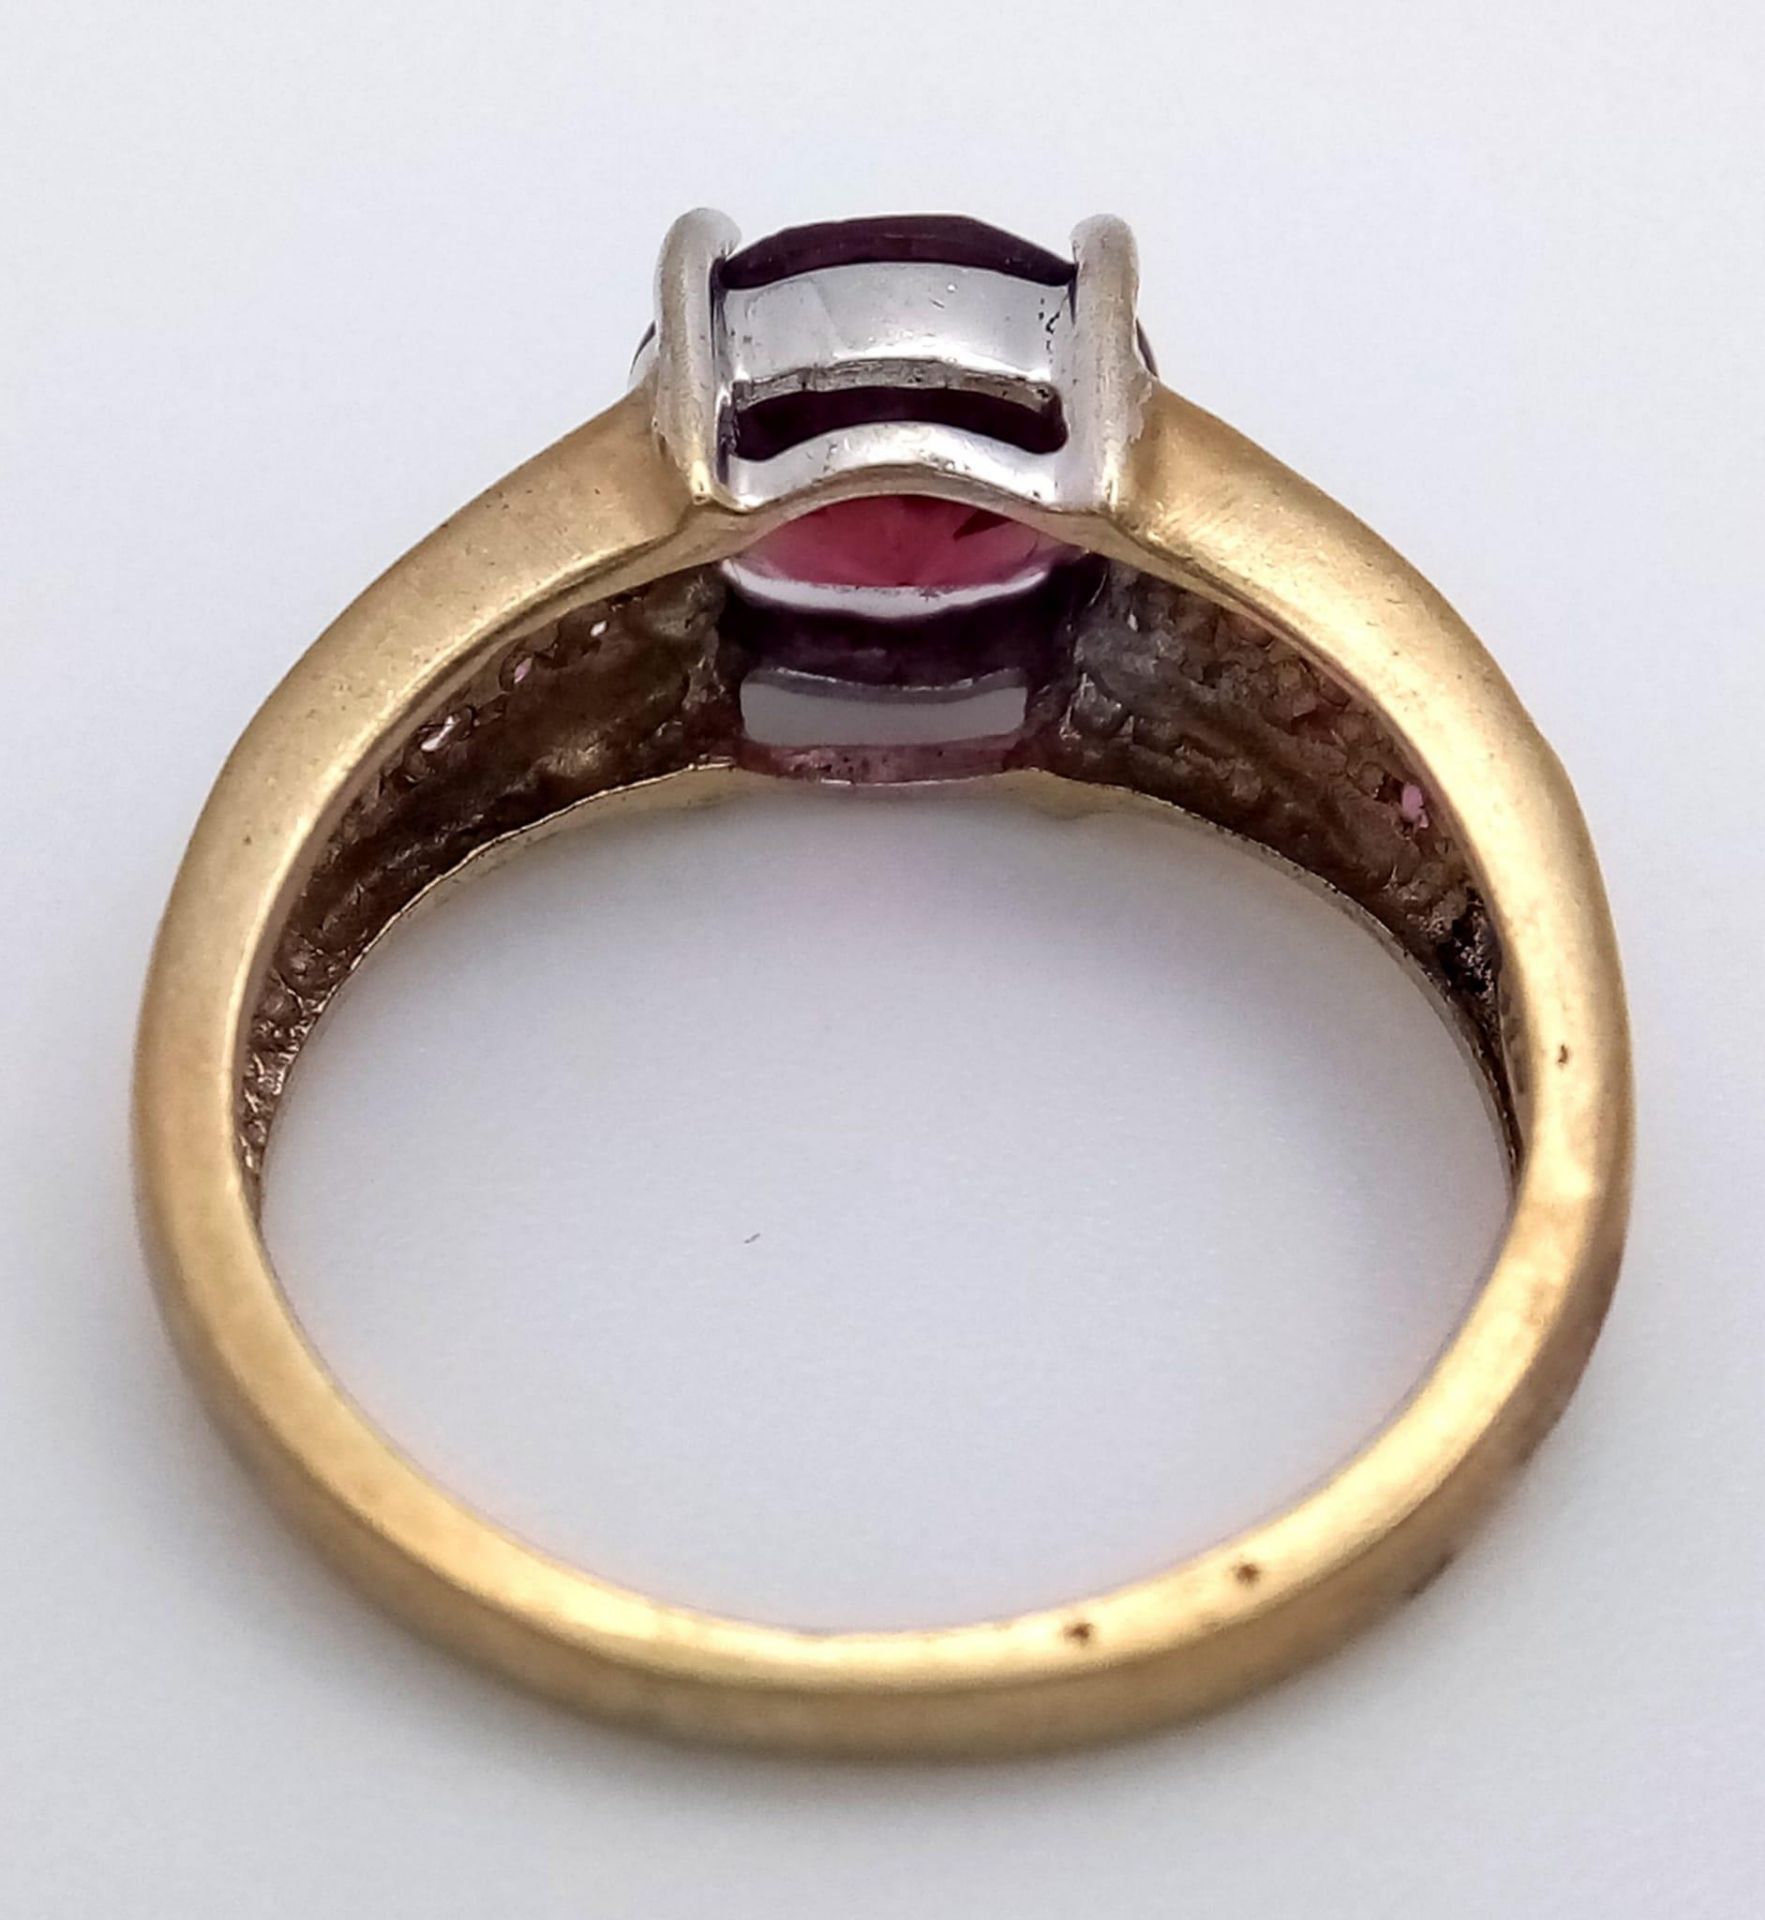 A 9K Yellow Gold Garnet and Ruby Ring. Central garnet with ruby accents. Size K. 3.05g total weight. - Bild 4 aus 5